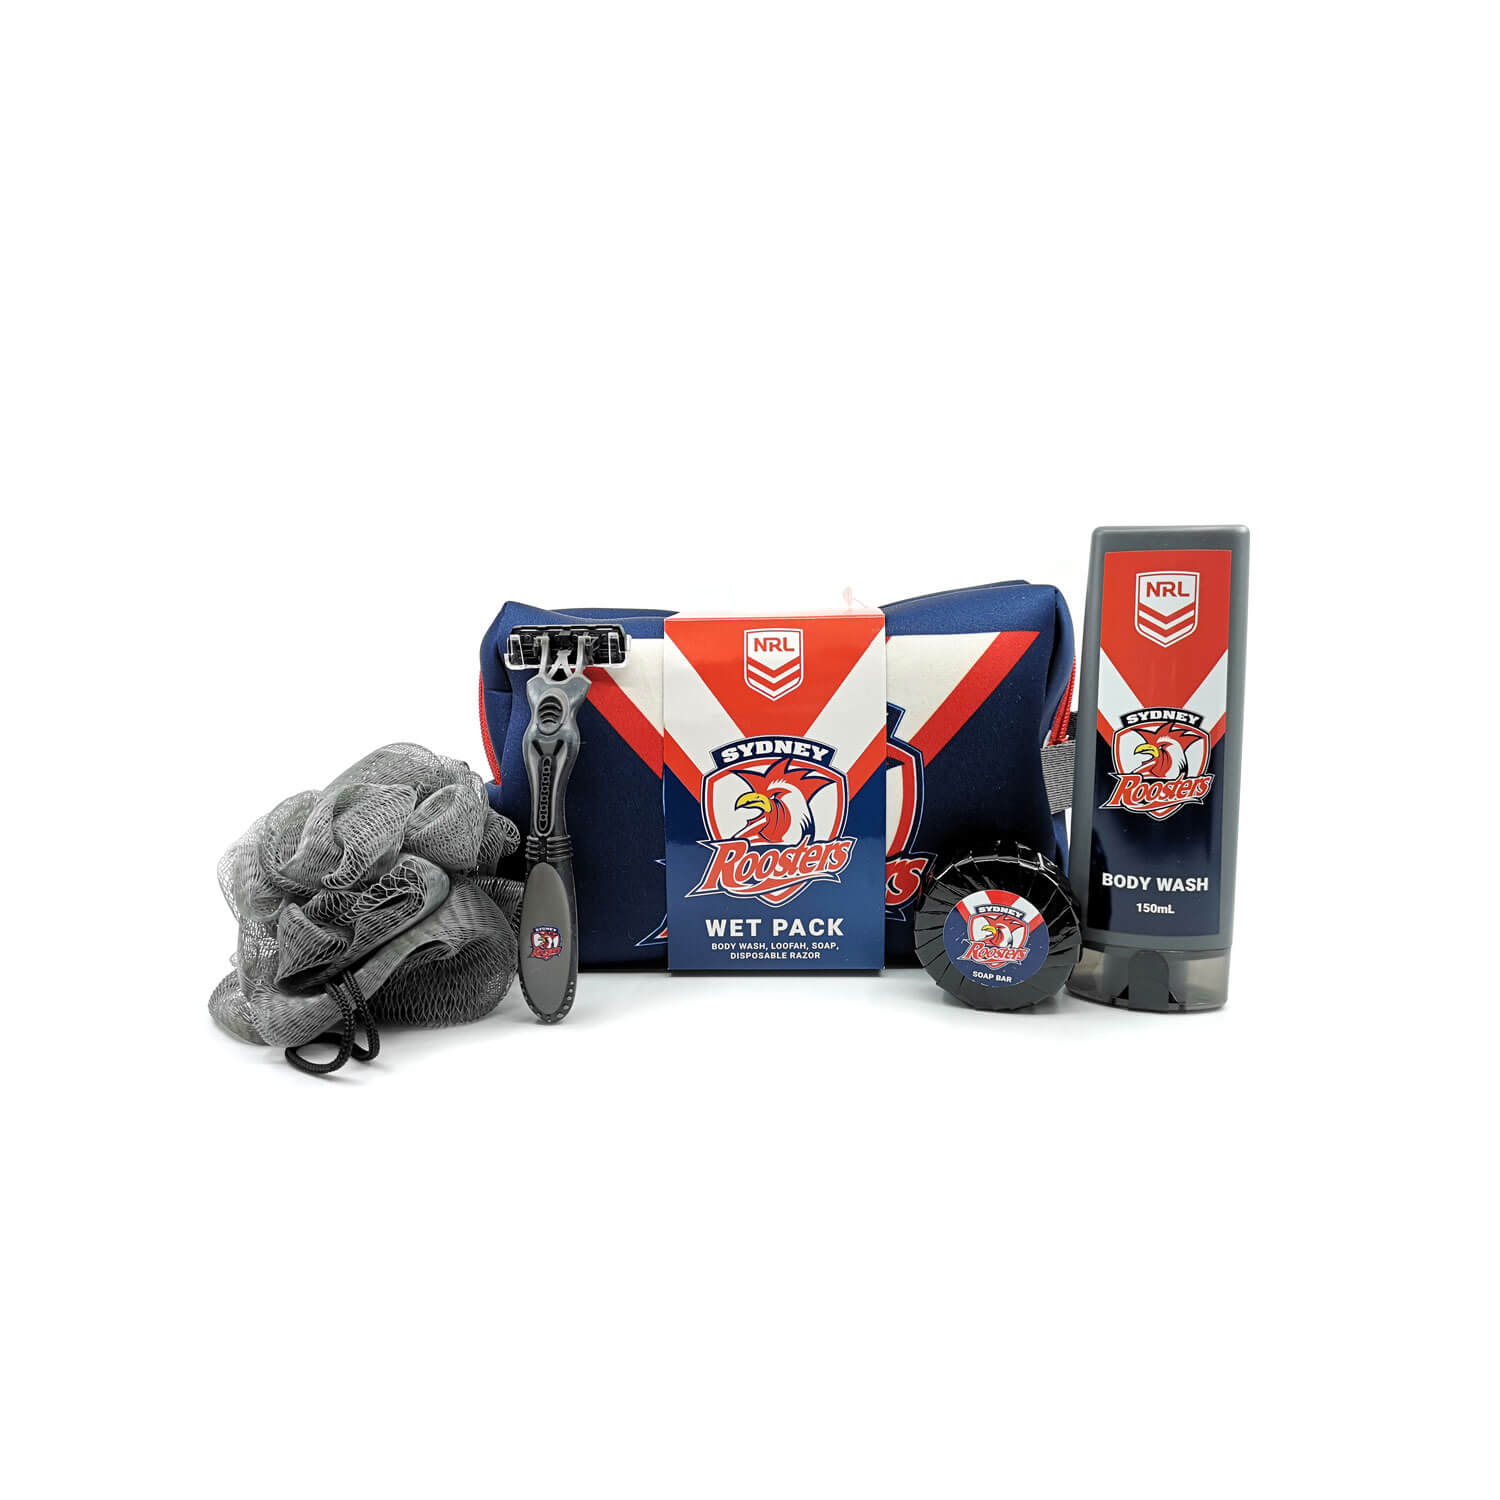 Sydney Roosters NRL Toiletry Set!